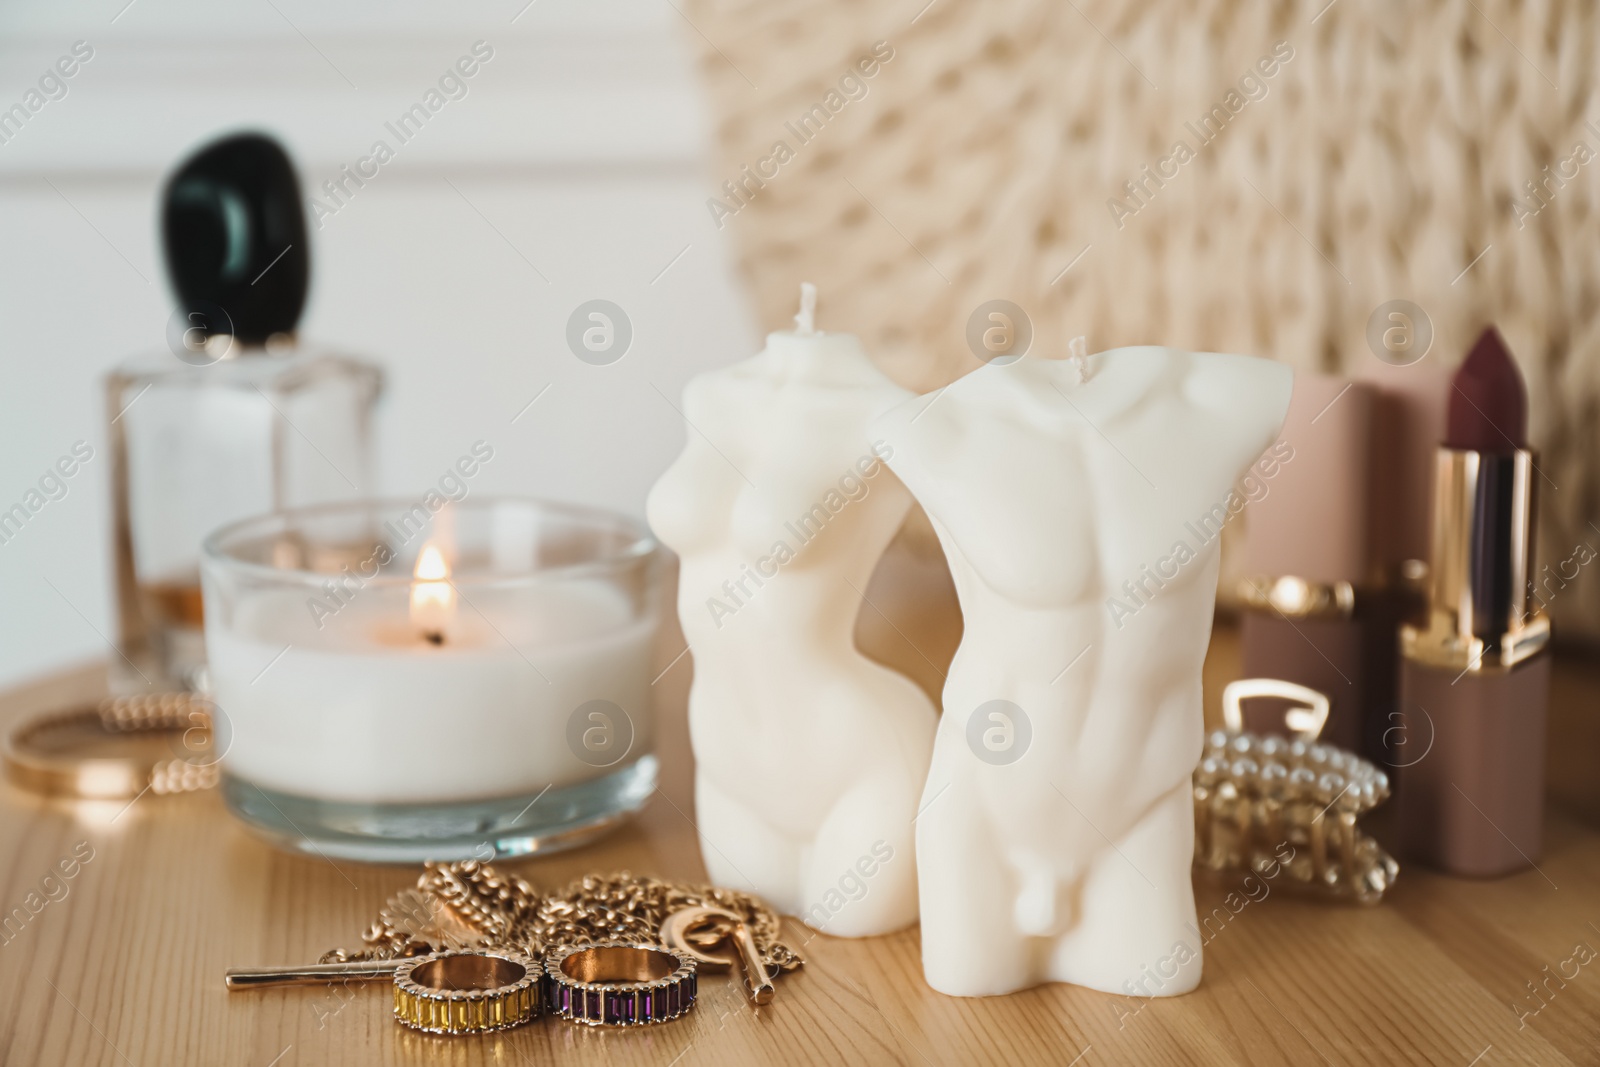 Photo of Beautiful female and male body shaped candles on wooden table. Stylish decor